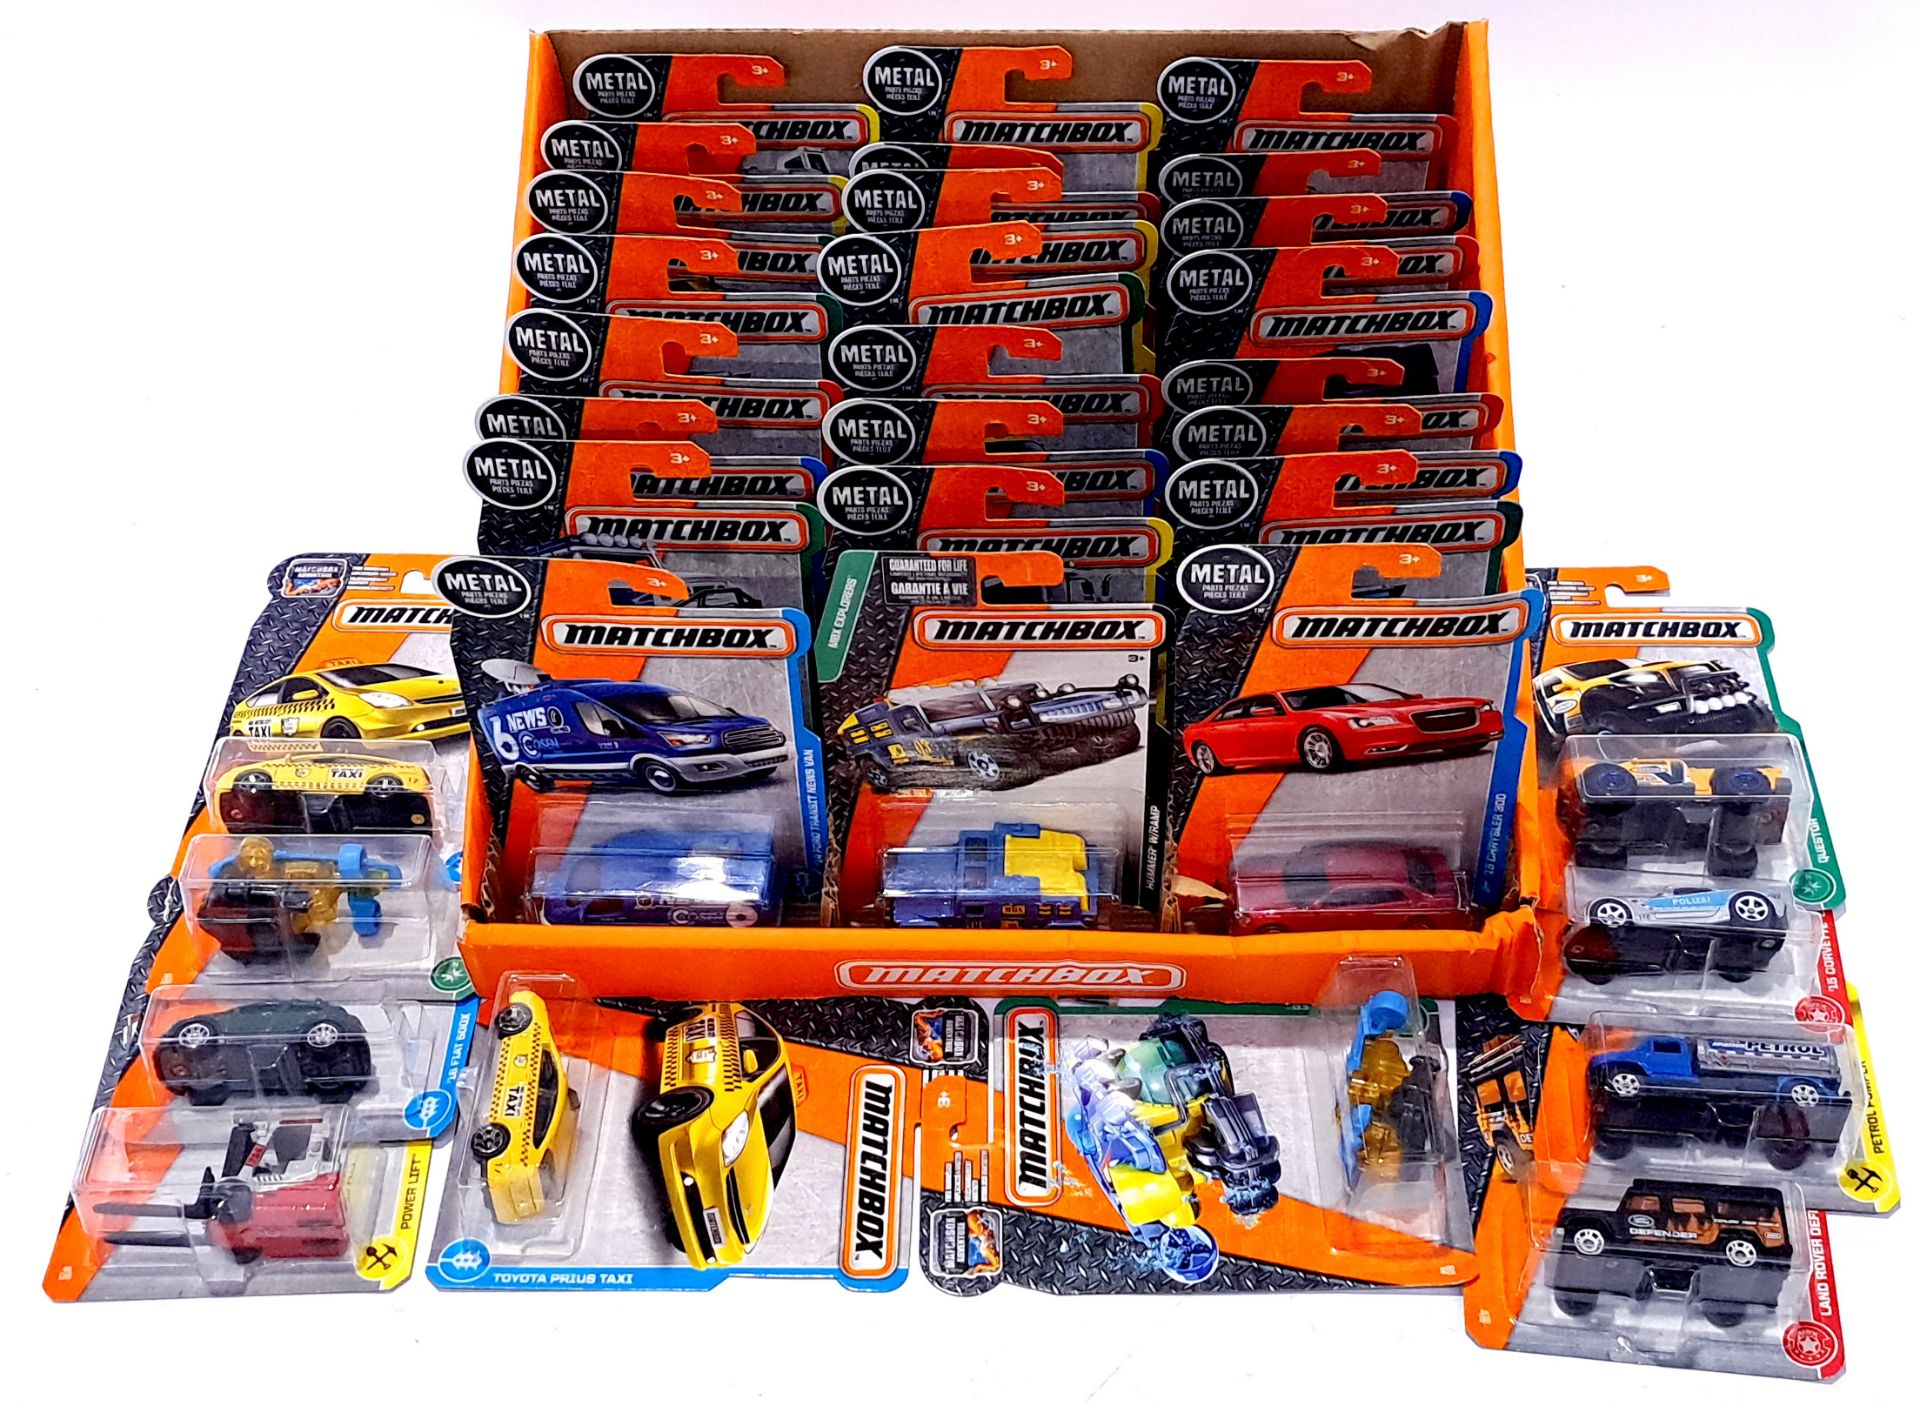 Matchbox Superfast a group of recent issues with Display box. Conditions generally appear Excelle...